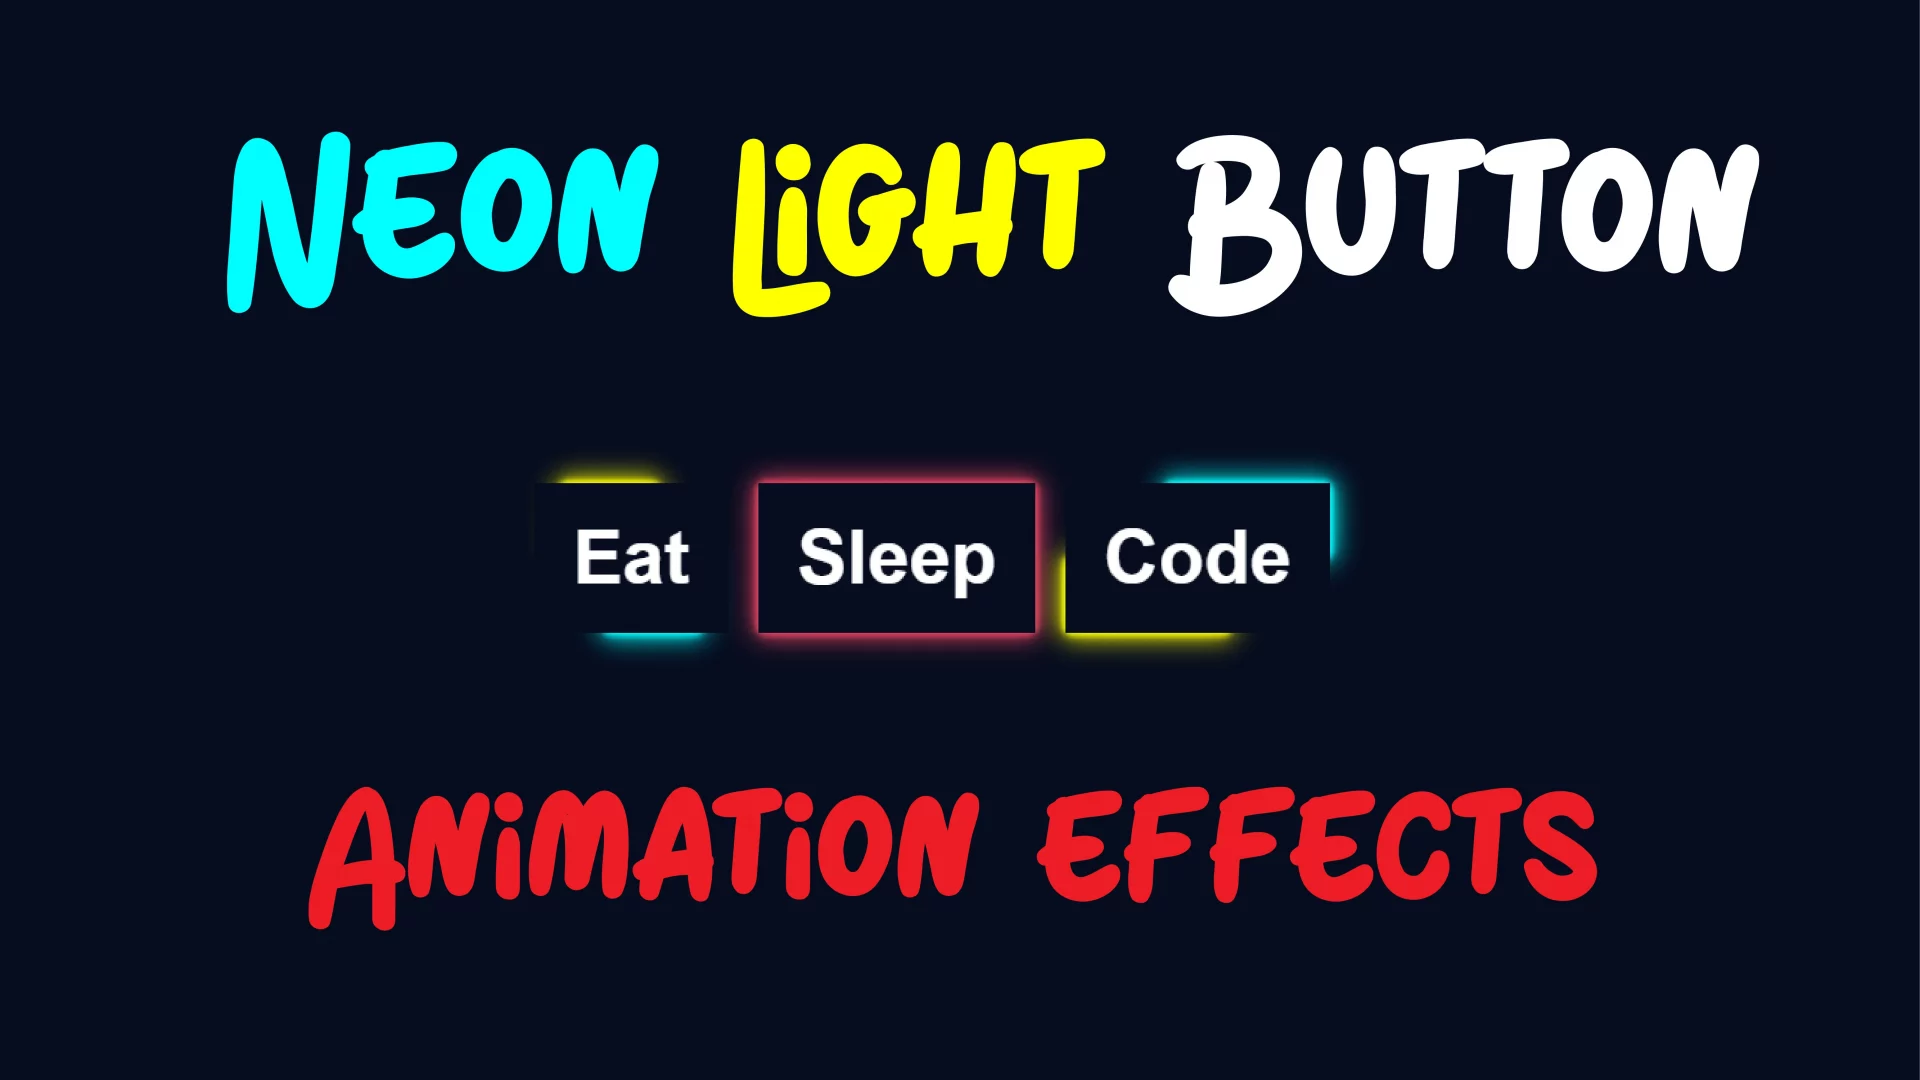 Neon Light Button Animation Effects